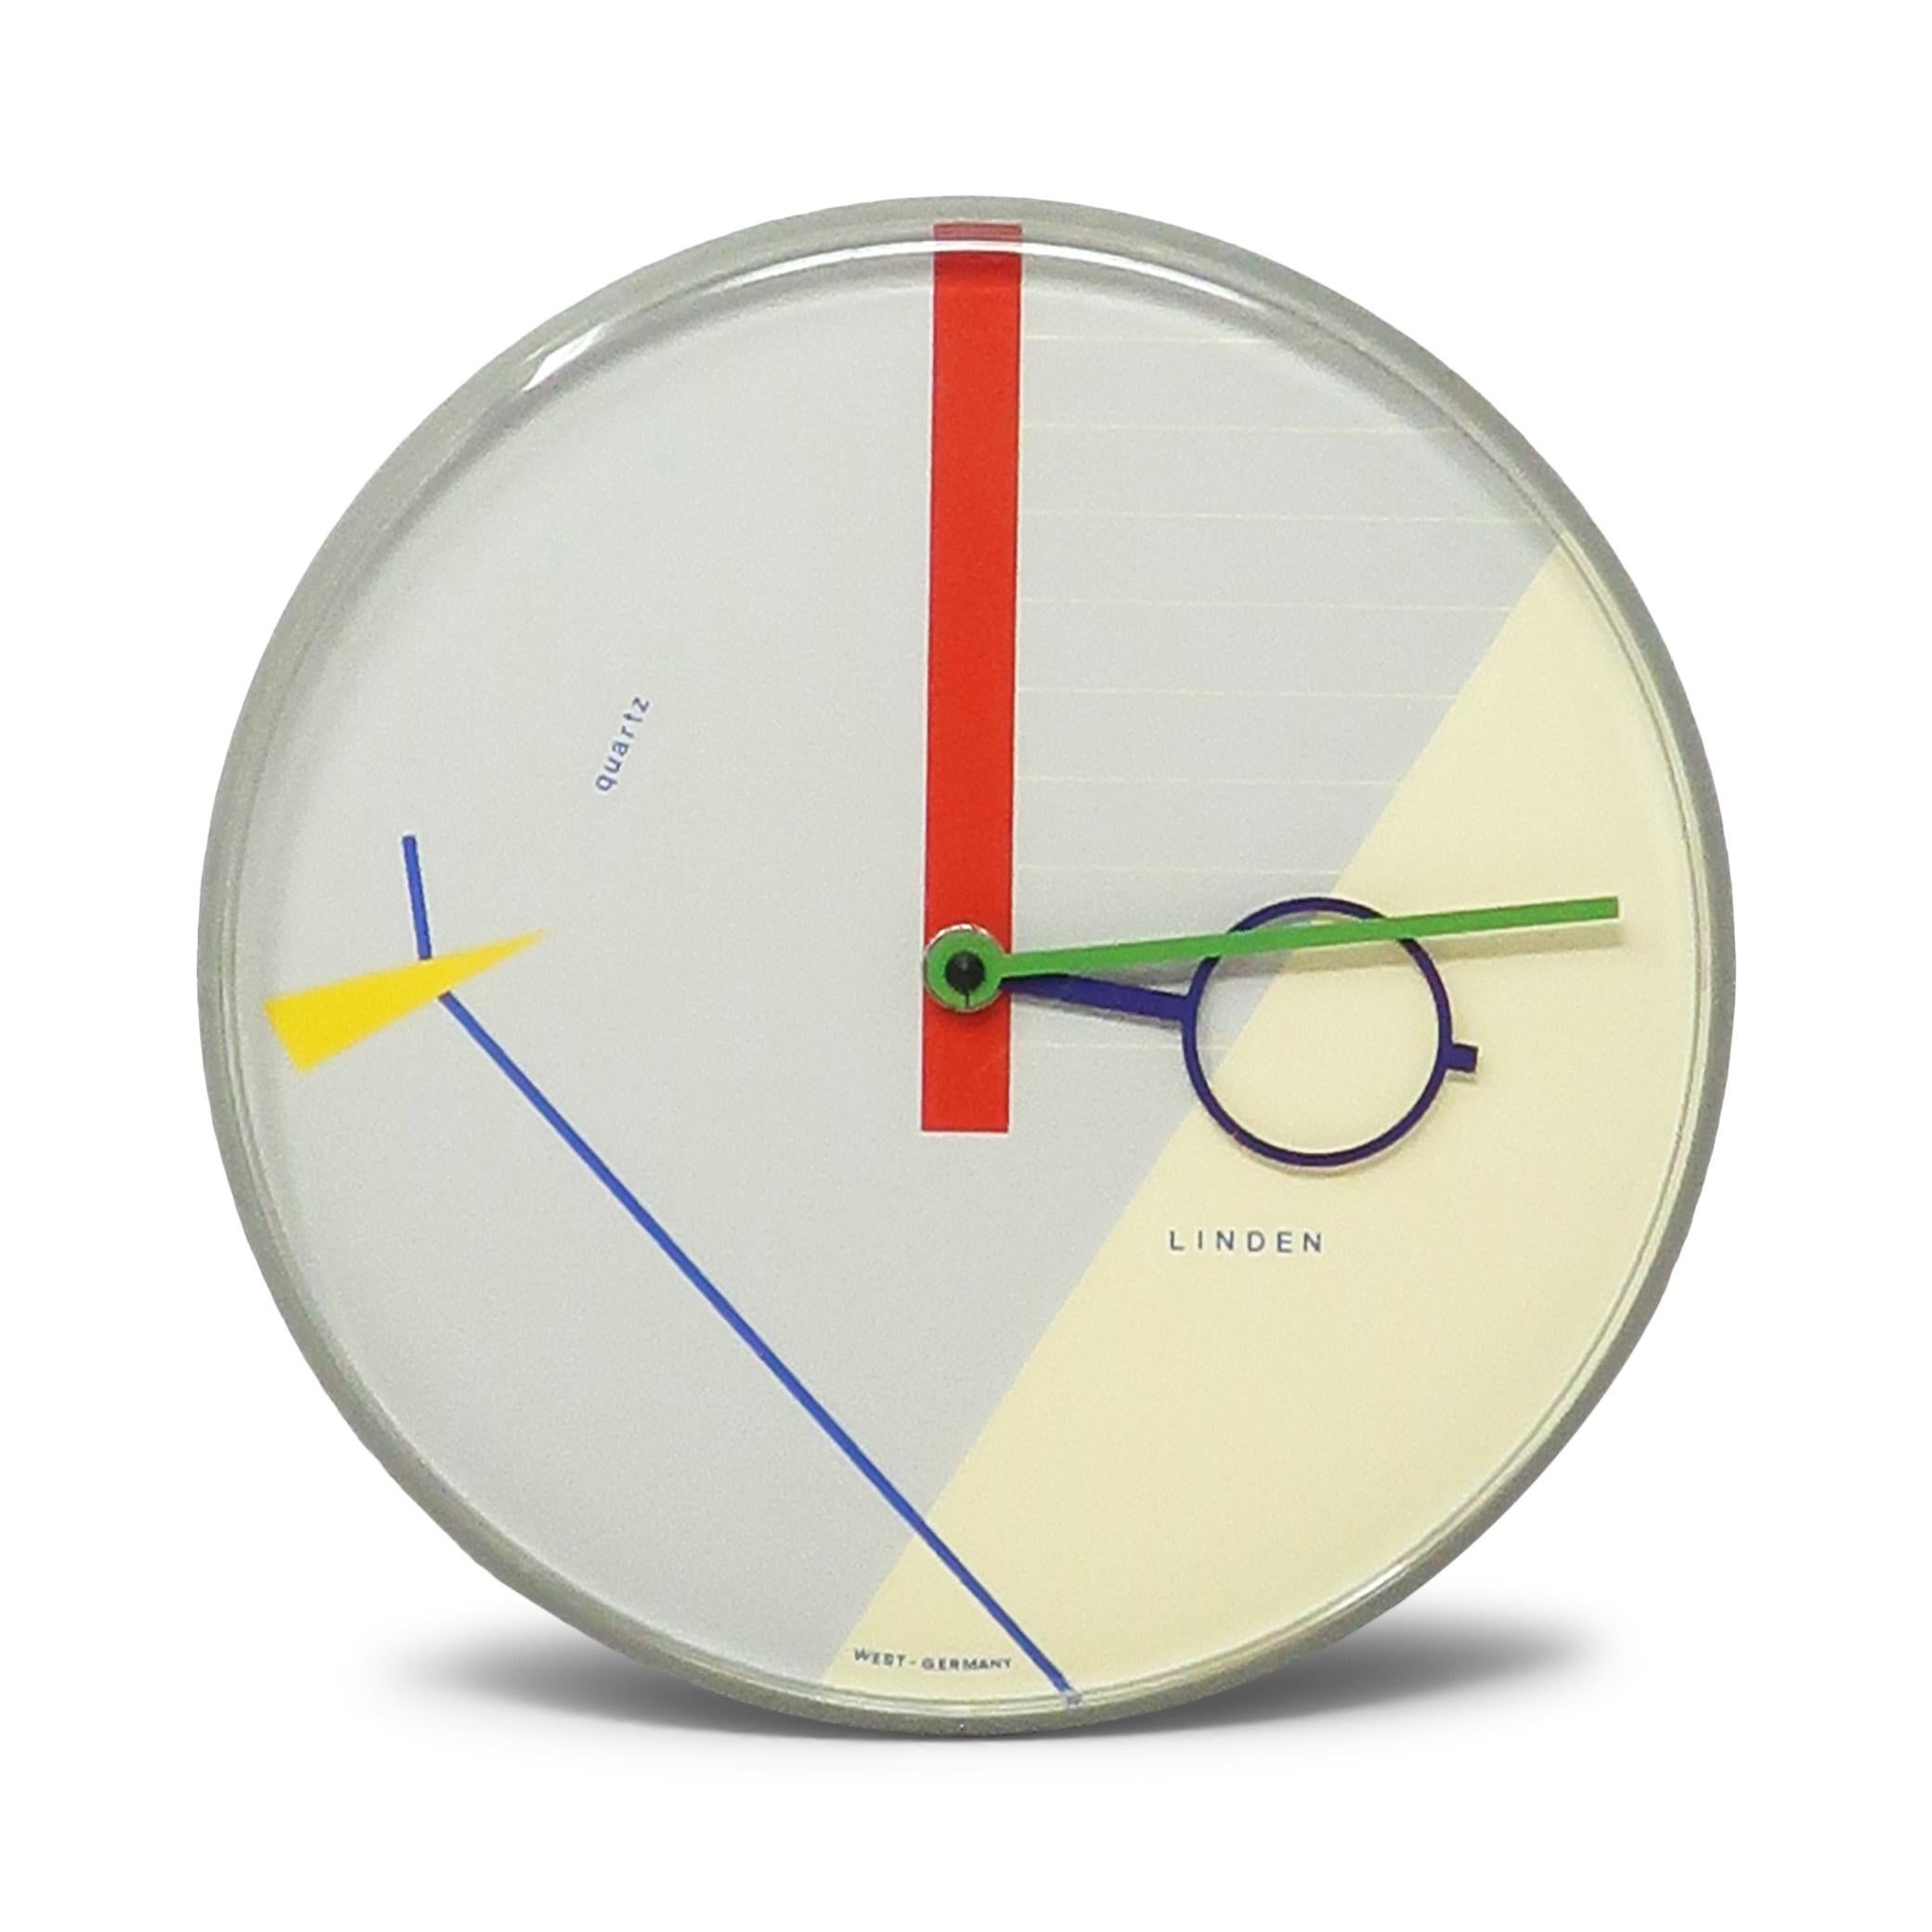 A beautiful postmodern wall clock from the 1980s by West German clockmaker Linden.  It has a gray case, gray and off-white face with geometric accents, and blue and green hands,  Striking contrast and fantastic pop of colors with blue, red, and